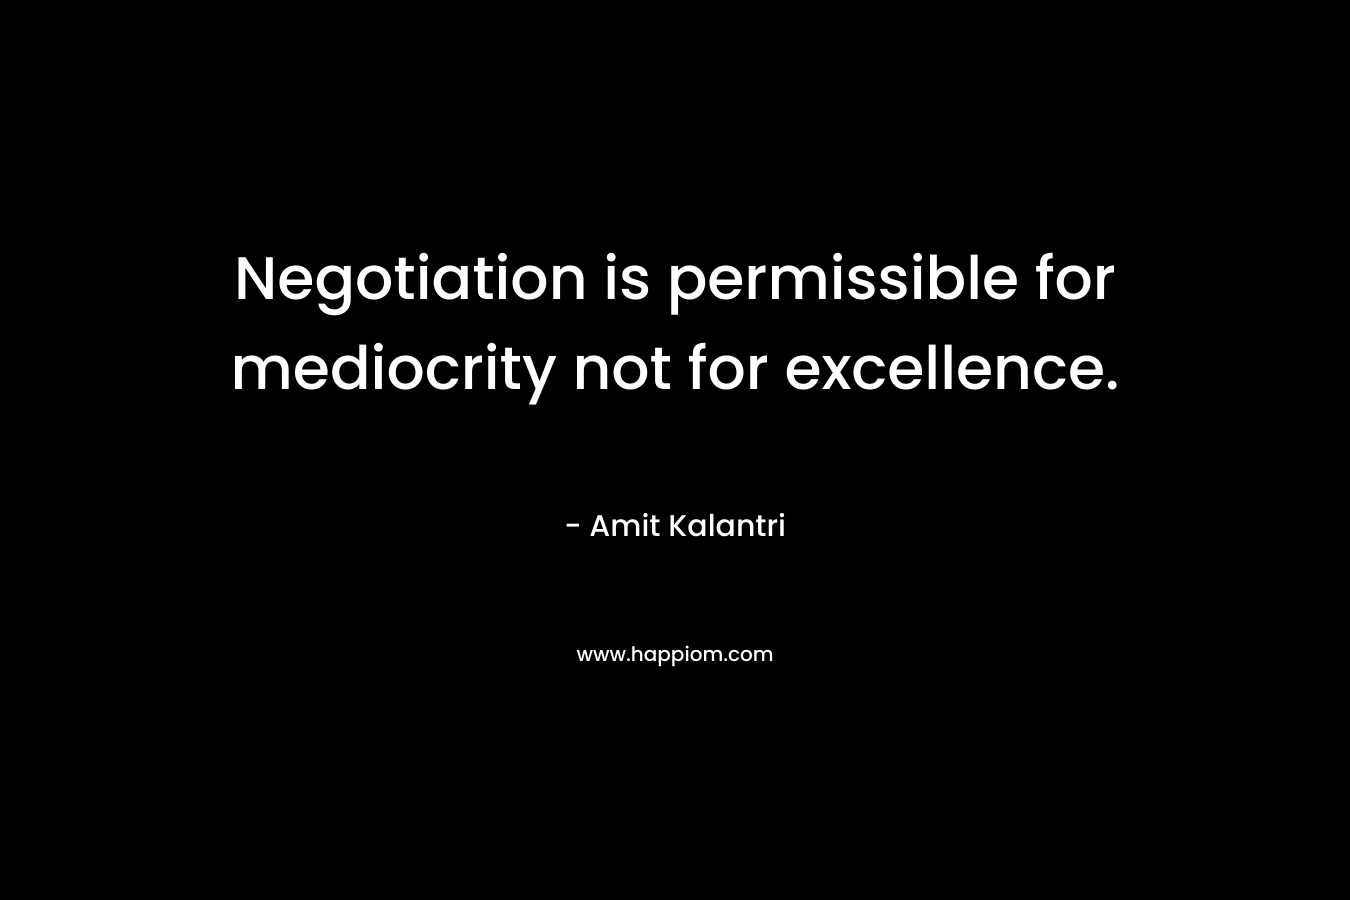 Negotiation is permissible for mediocrity not for excellence. – Amit Kalantri